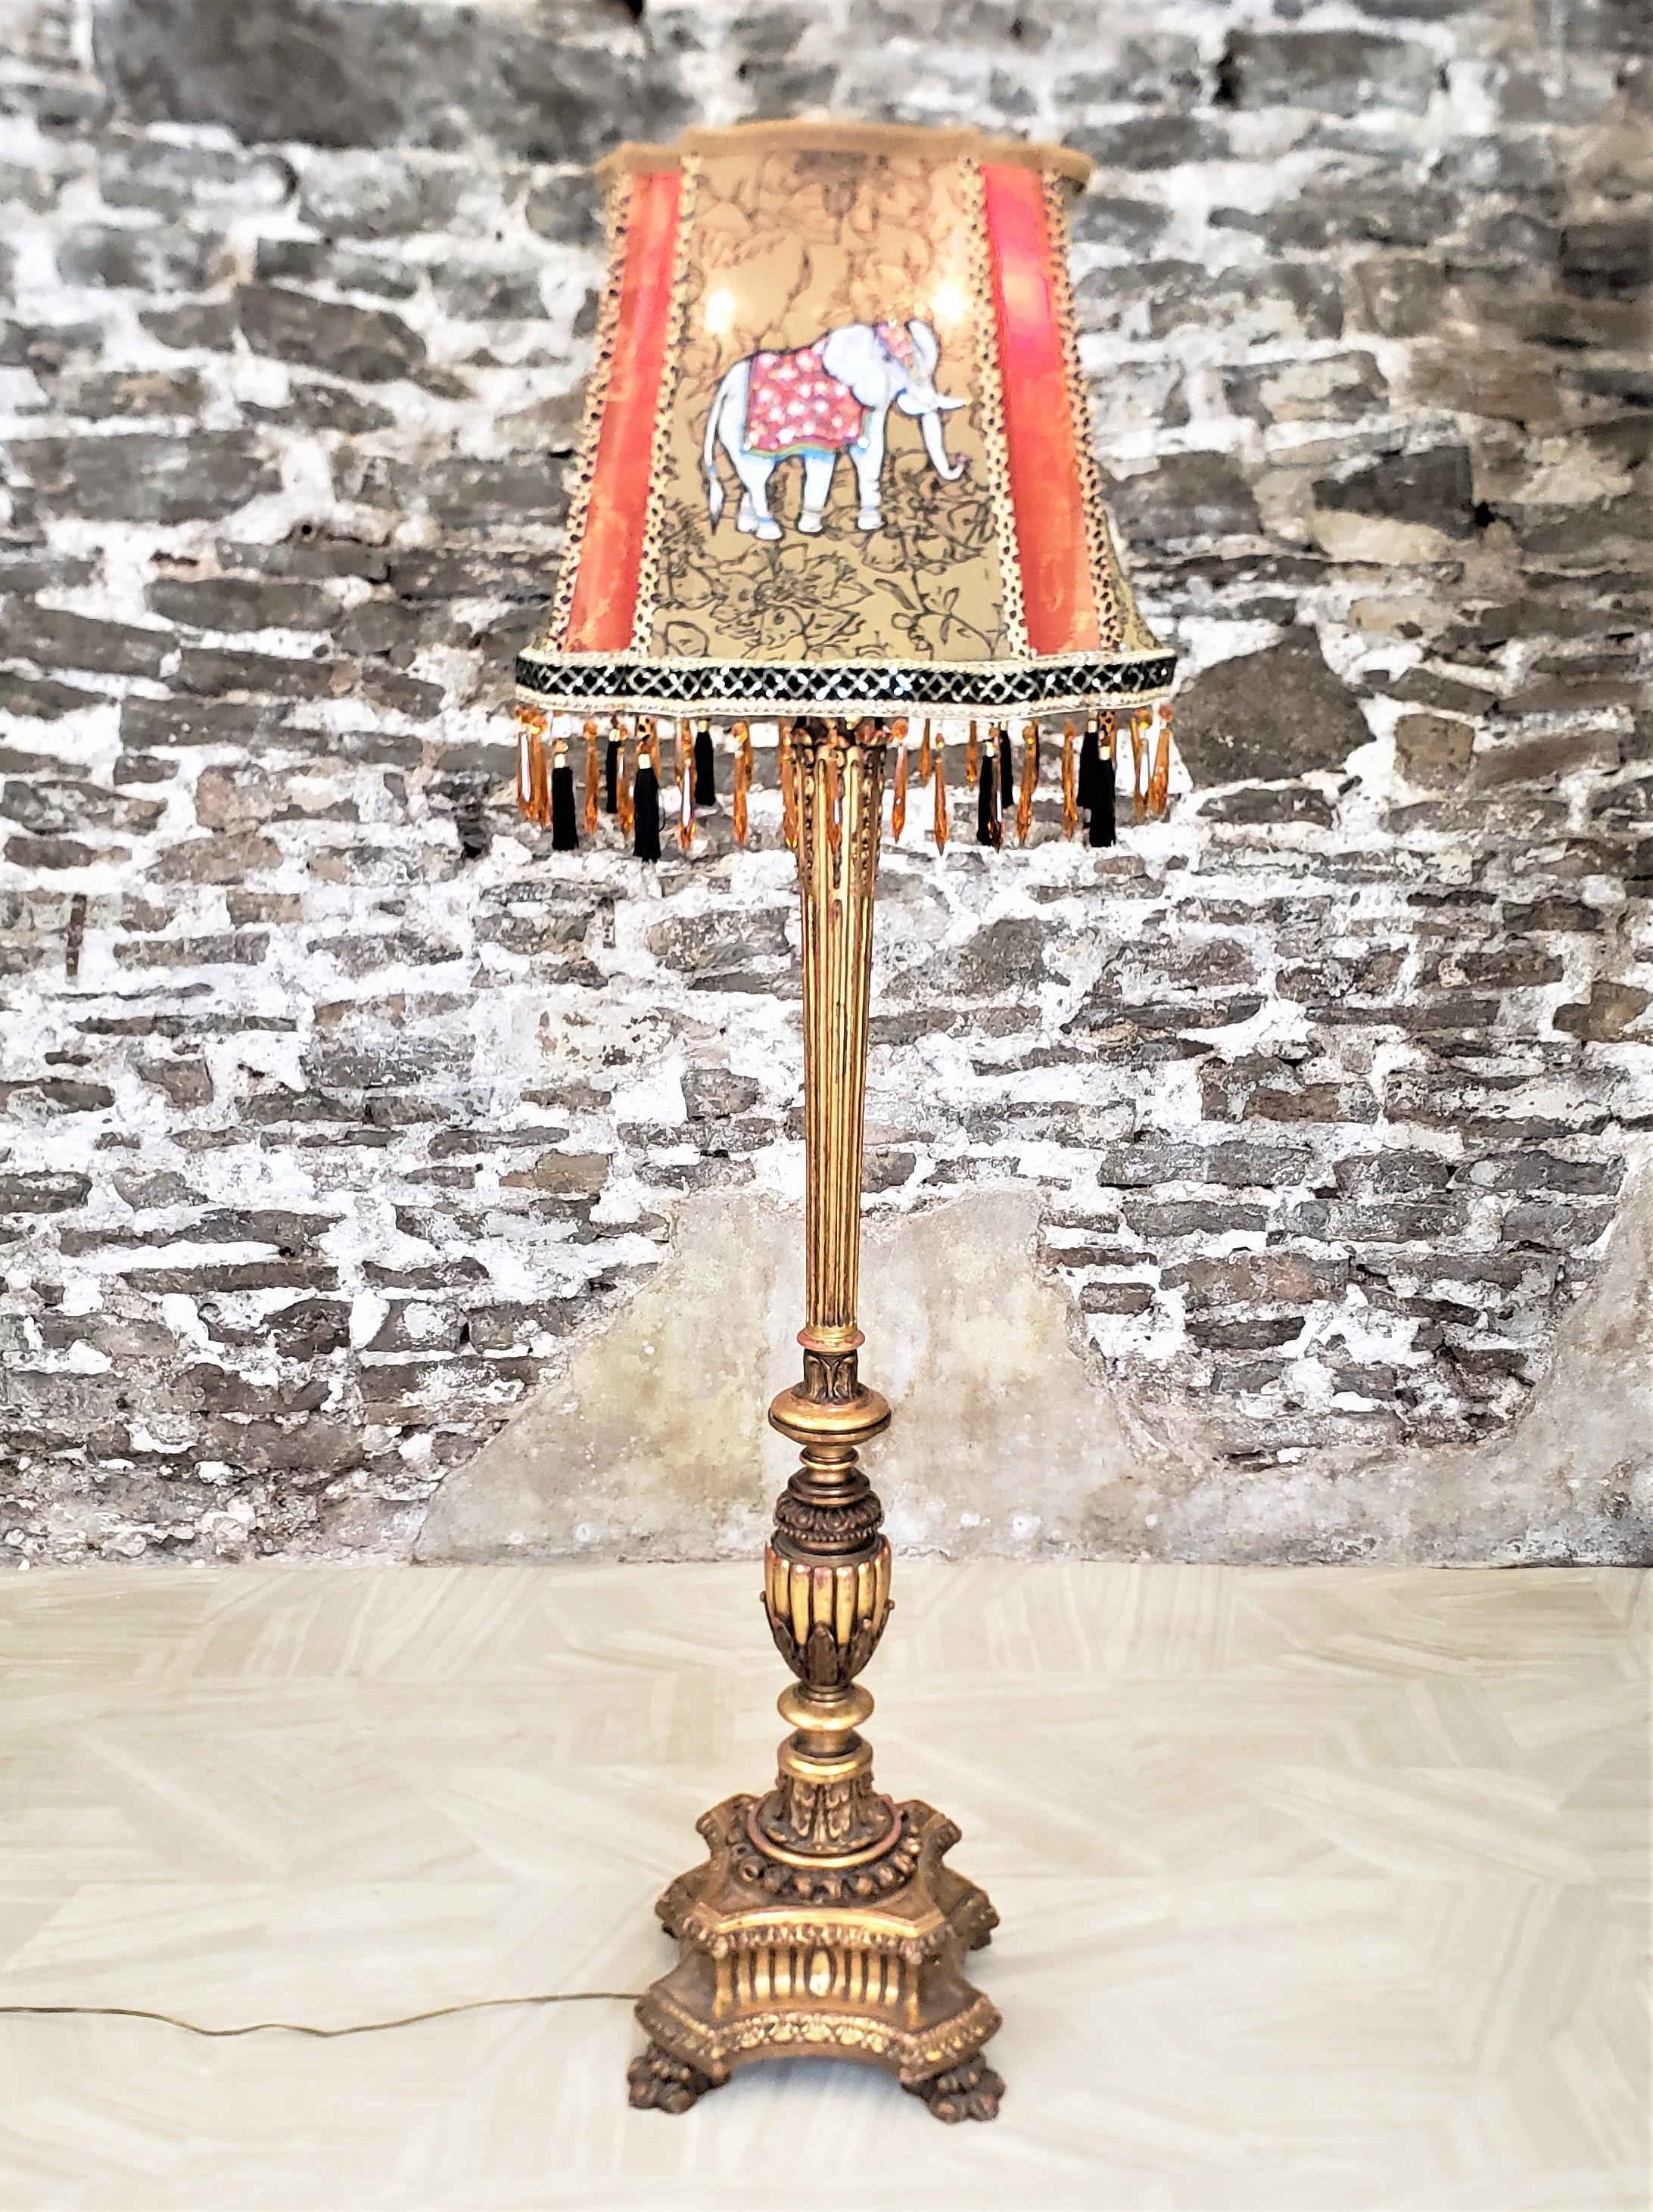 Gesso Antique Italian Florentine Hand-Carved & Gilt Finished Floor Lamp & Shade For Sale